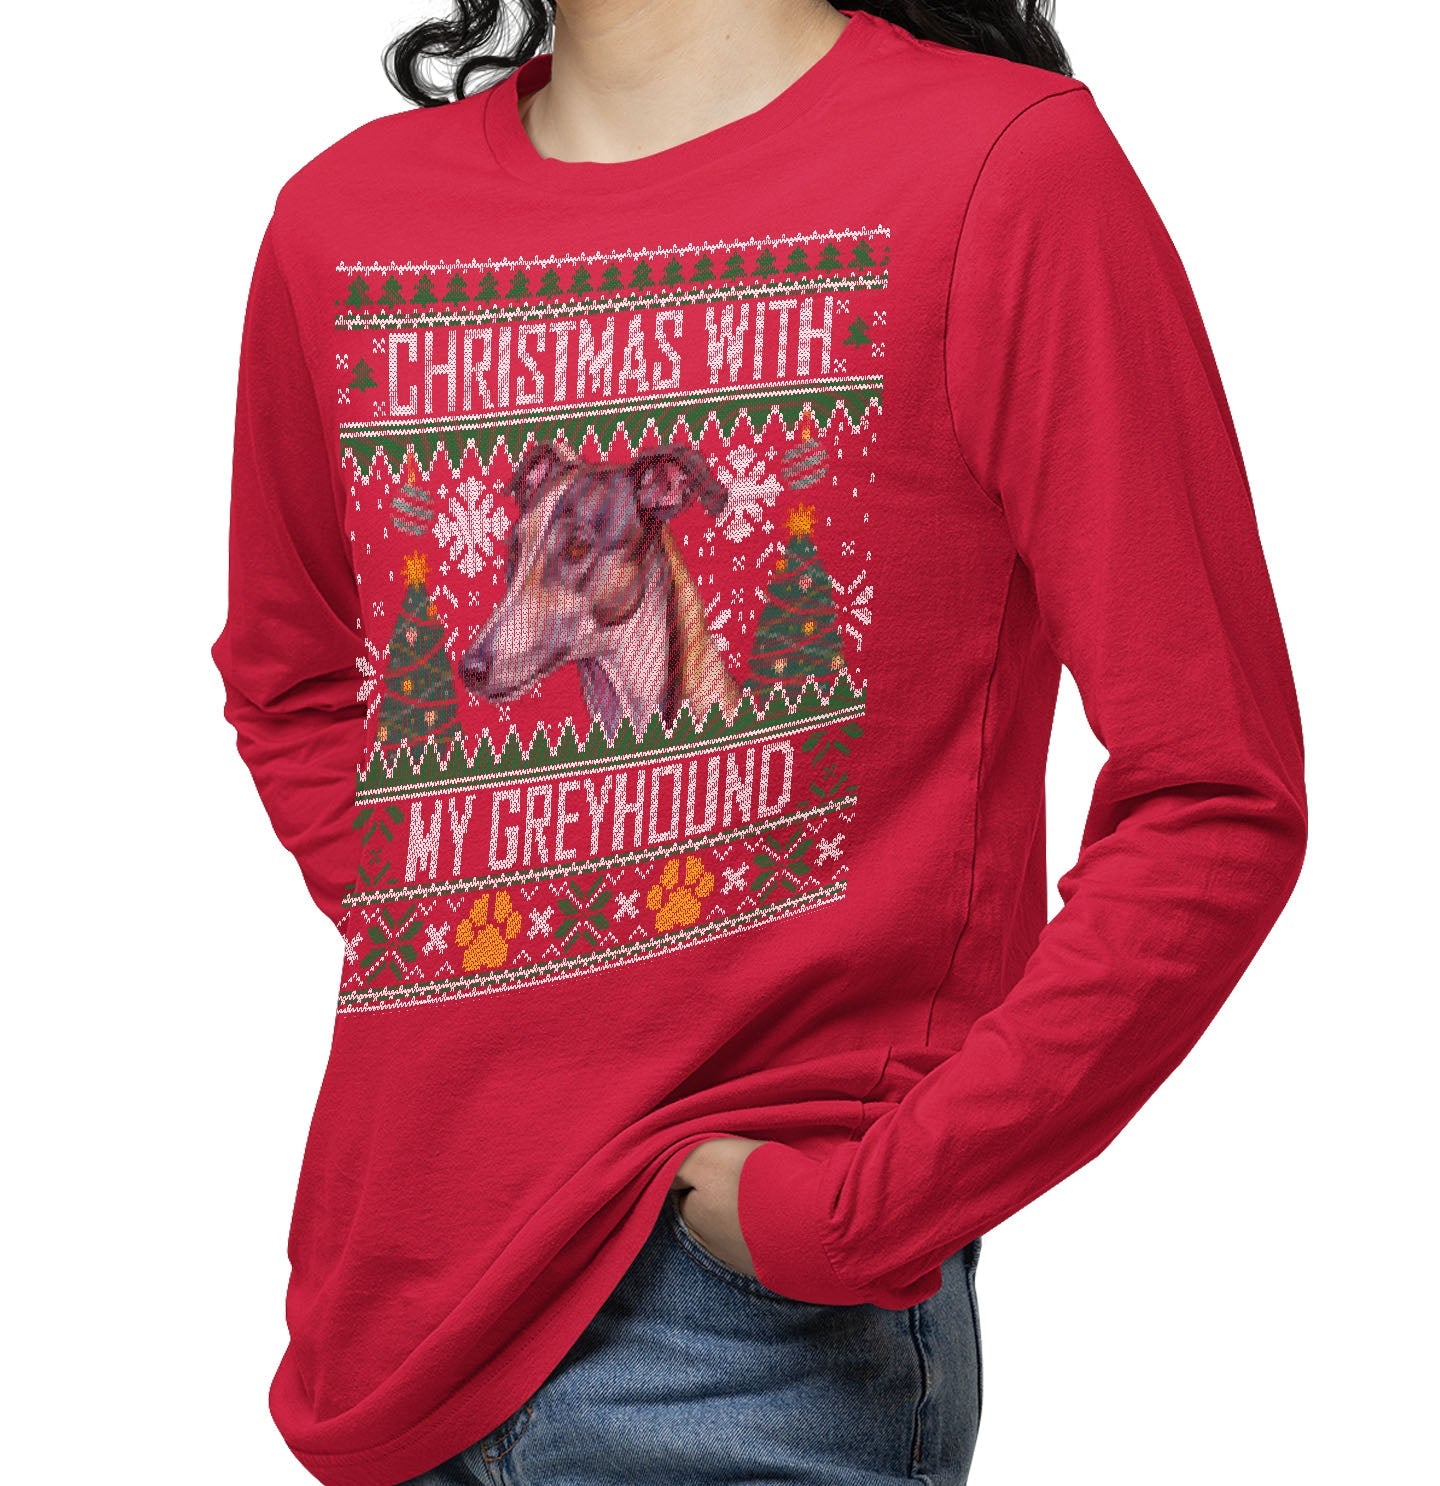 Ugly Sweater Christmas with My Greyhound - Adult Unisex Long Sleeve T-Shirt